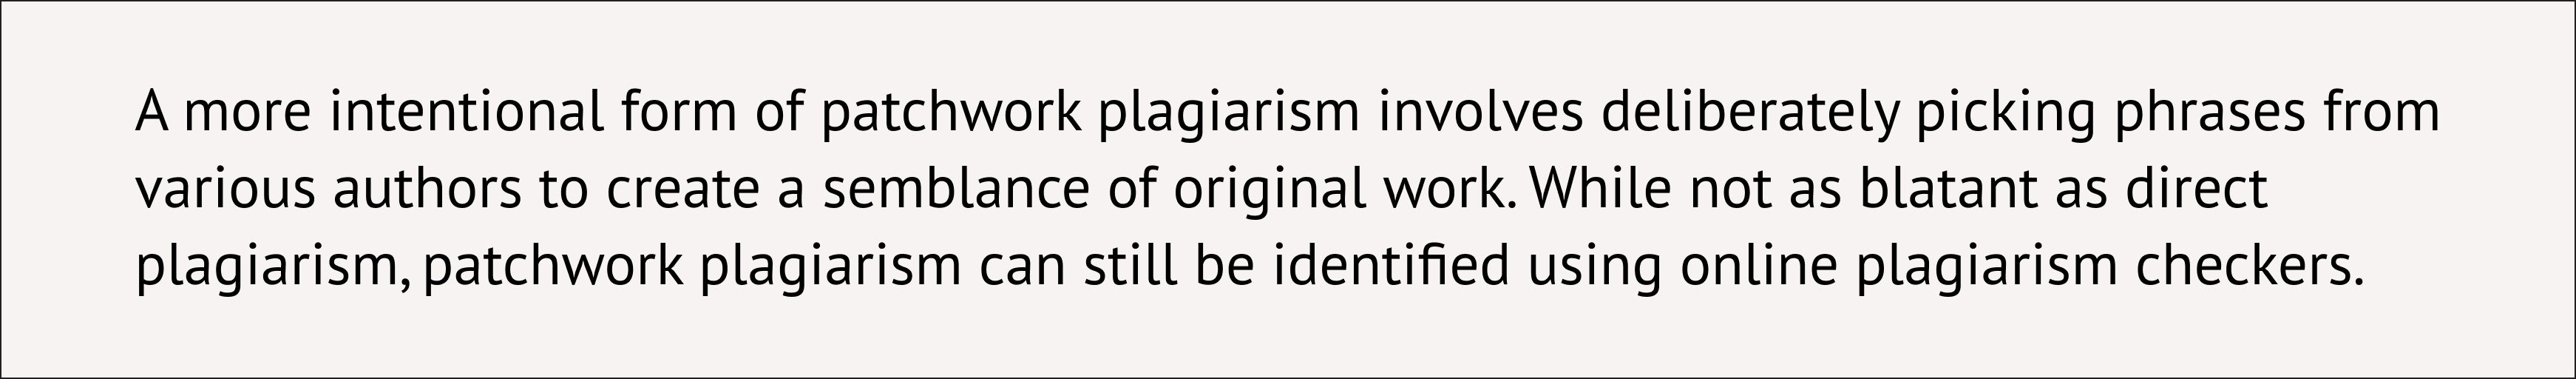 An image that explains patchwork plagiarism meaning